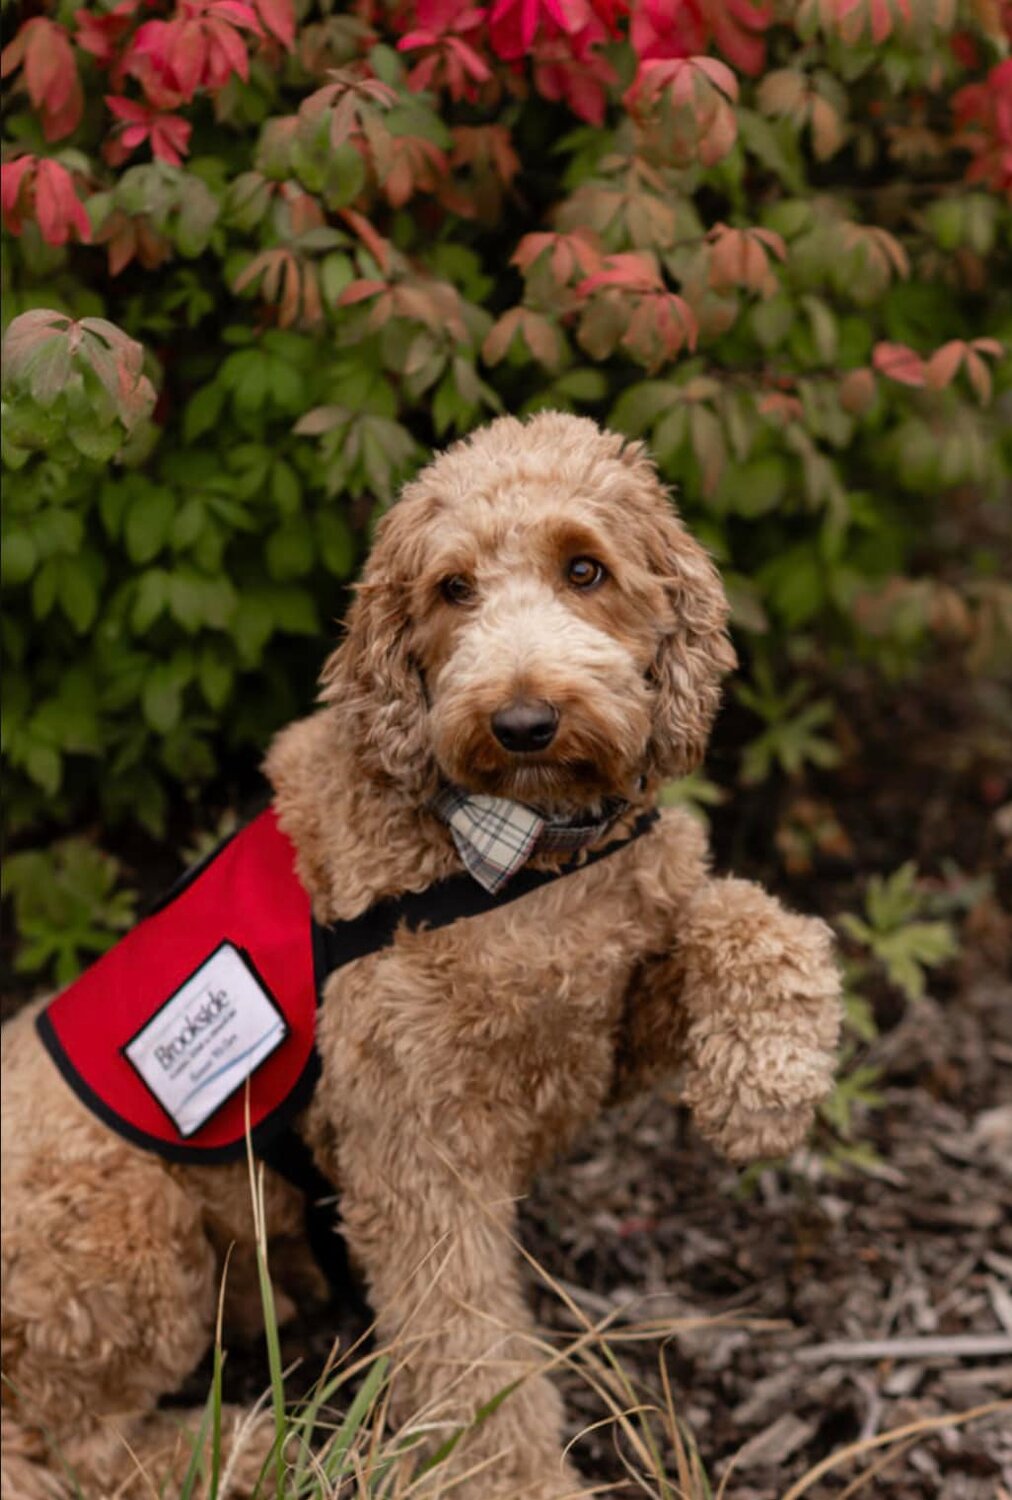 Beacon, an Australian Labradoodle and certified funeral service therapy dog, at Brookside Funeral Home & Crematory's new Wenatchee location, offers comfort to families during their time of need.